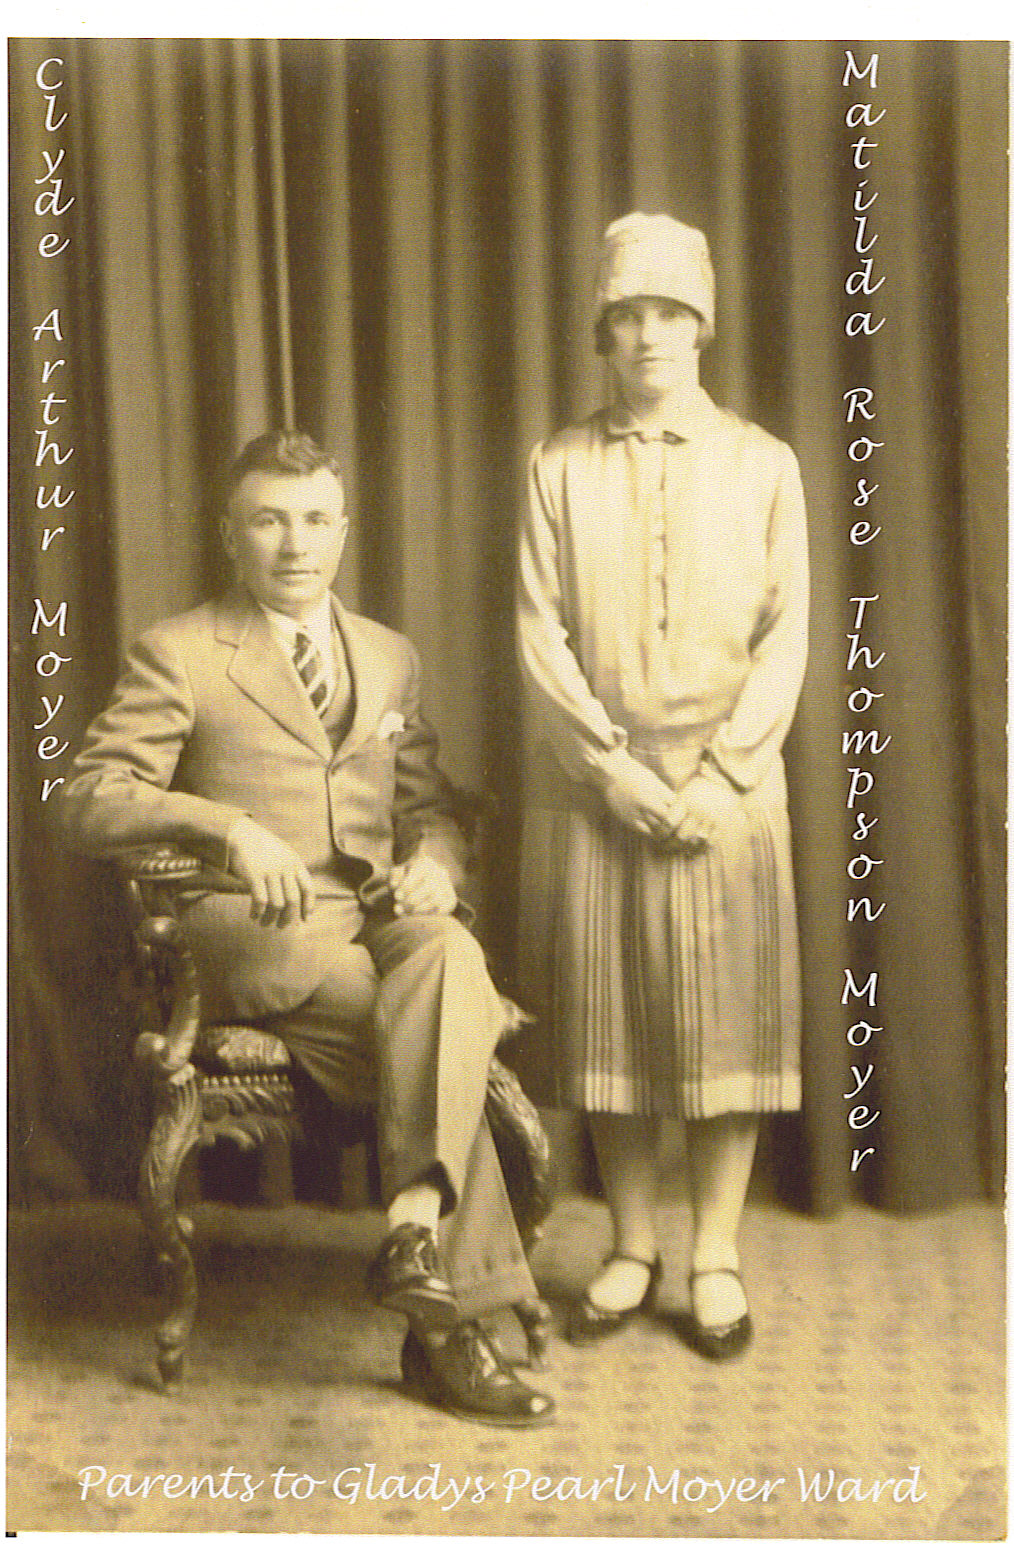 Photo of Clyde A. and Matilda R. Moyer